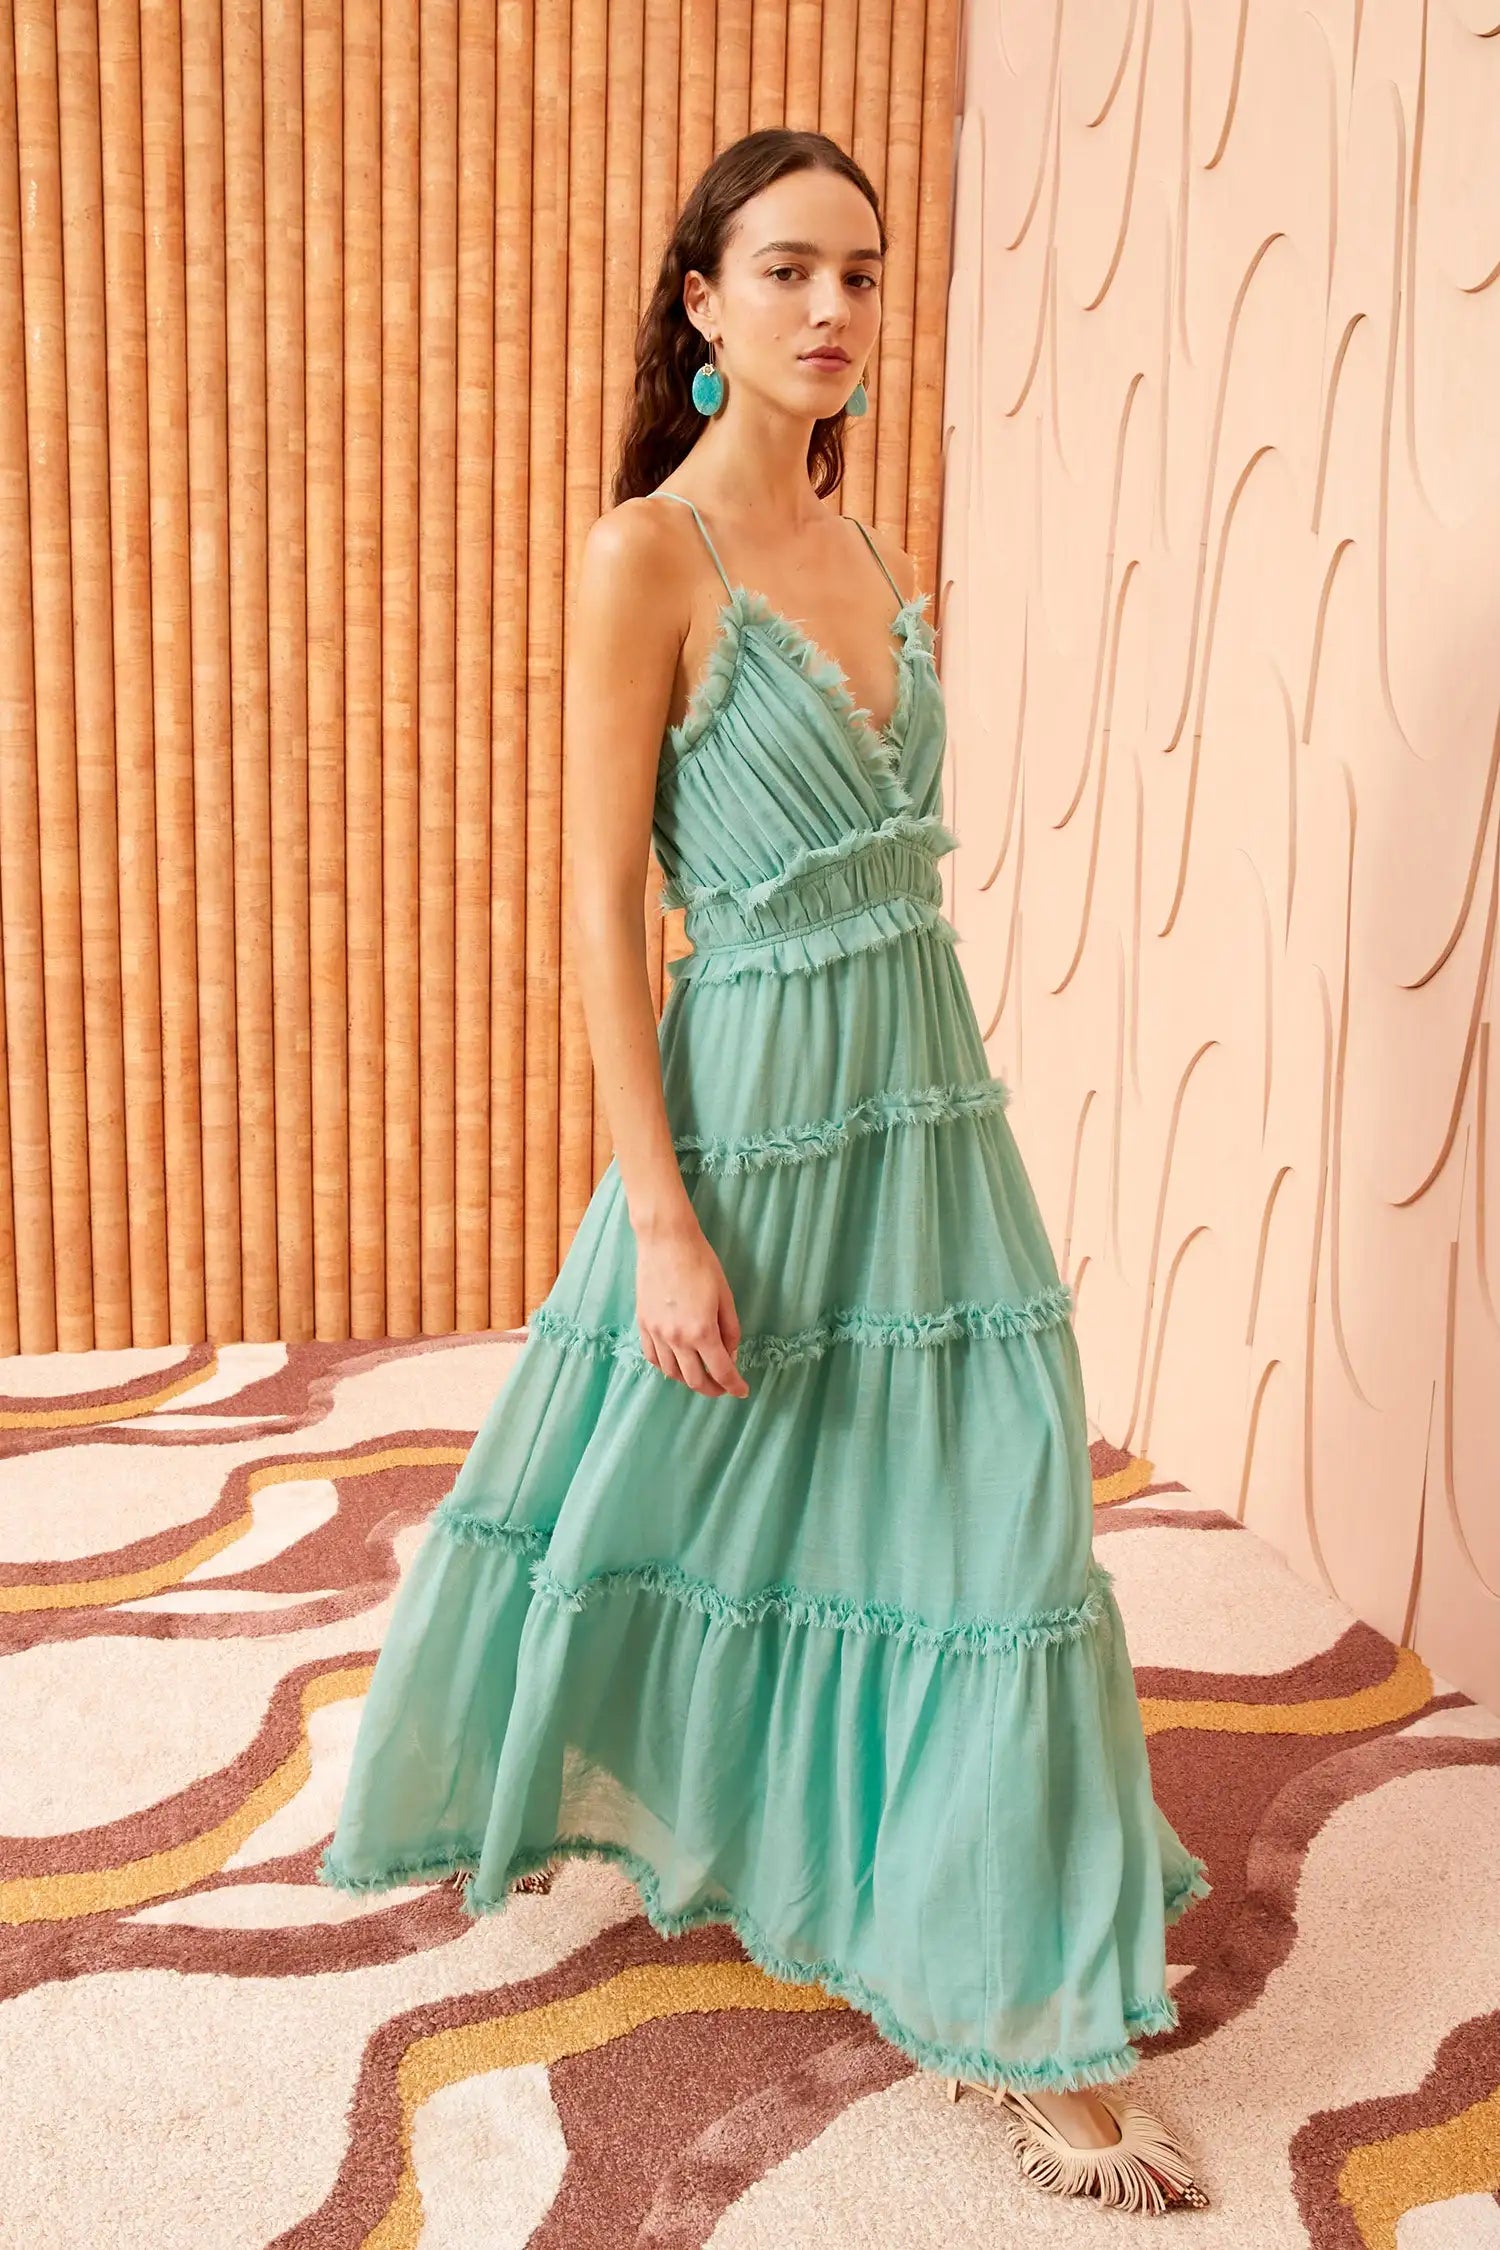 Experience the exquisite beauty of the Ulla Johnson New Mint Green Dress. Perfect for banquets and special occasions, this dress flows elegantly for a long and flattering silhouette. The soft mint color adds a touch of freshness and glamour. Make a statement and inspire others with this dress!